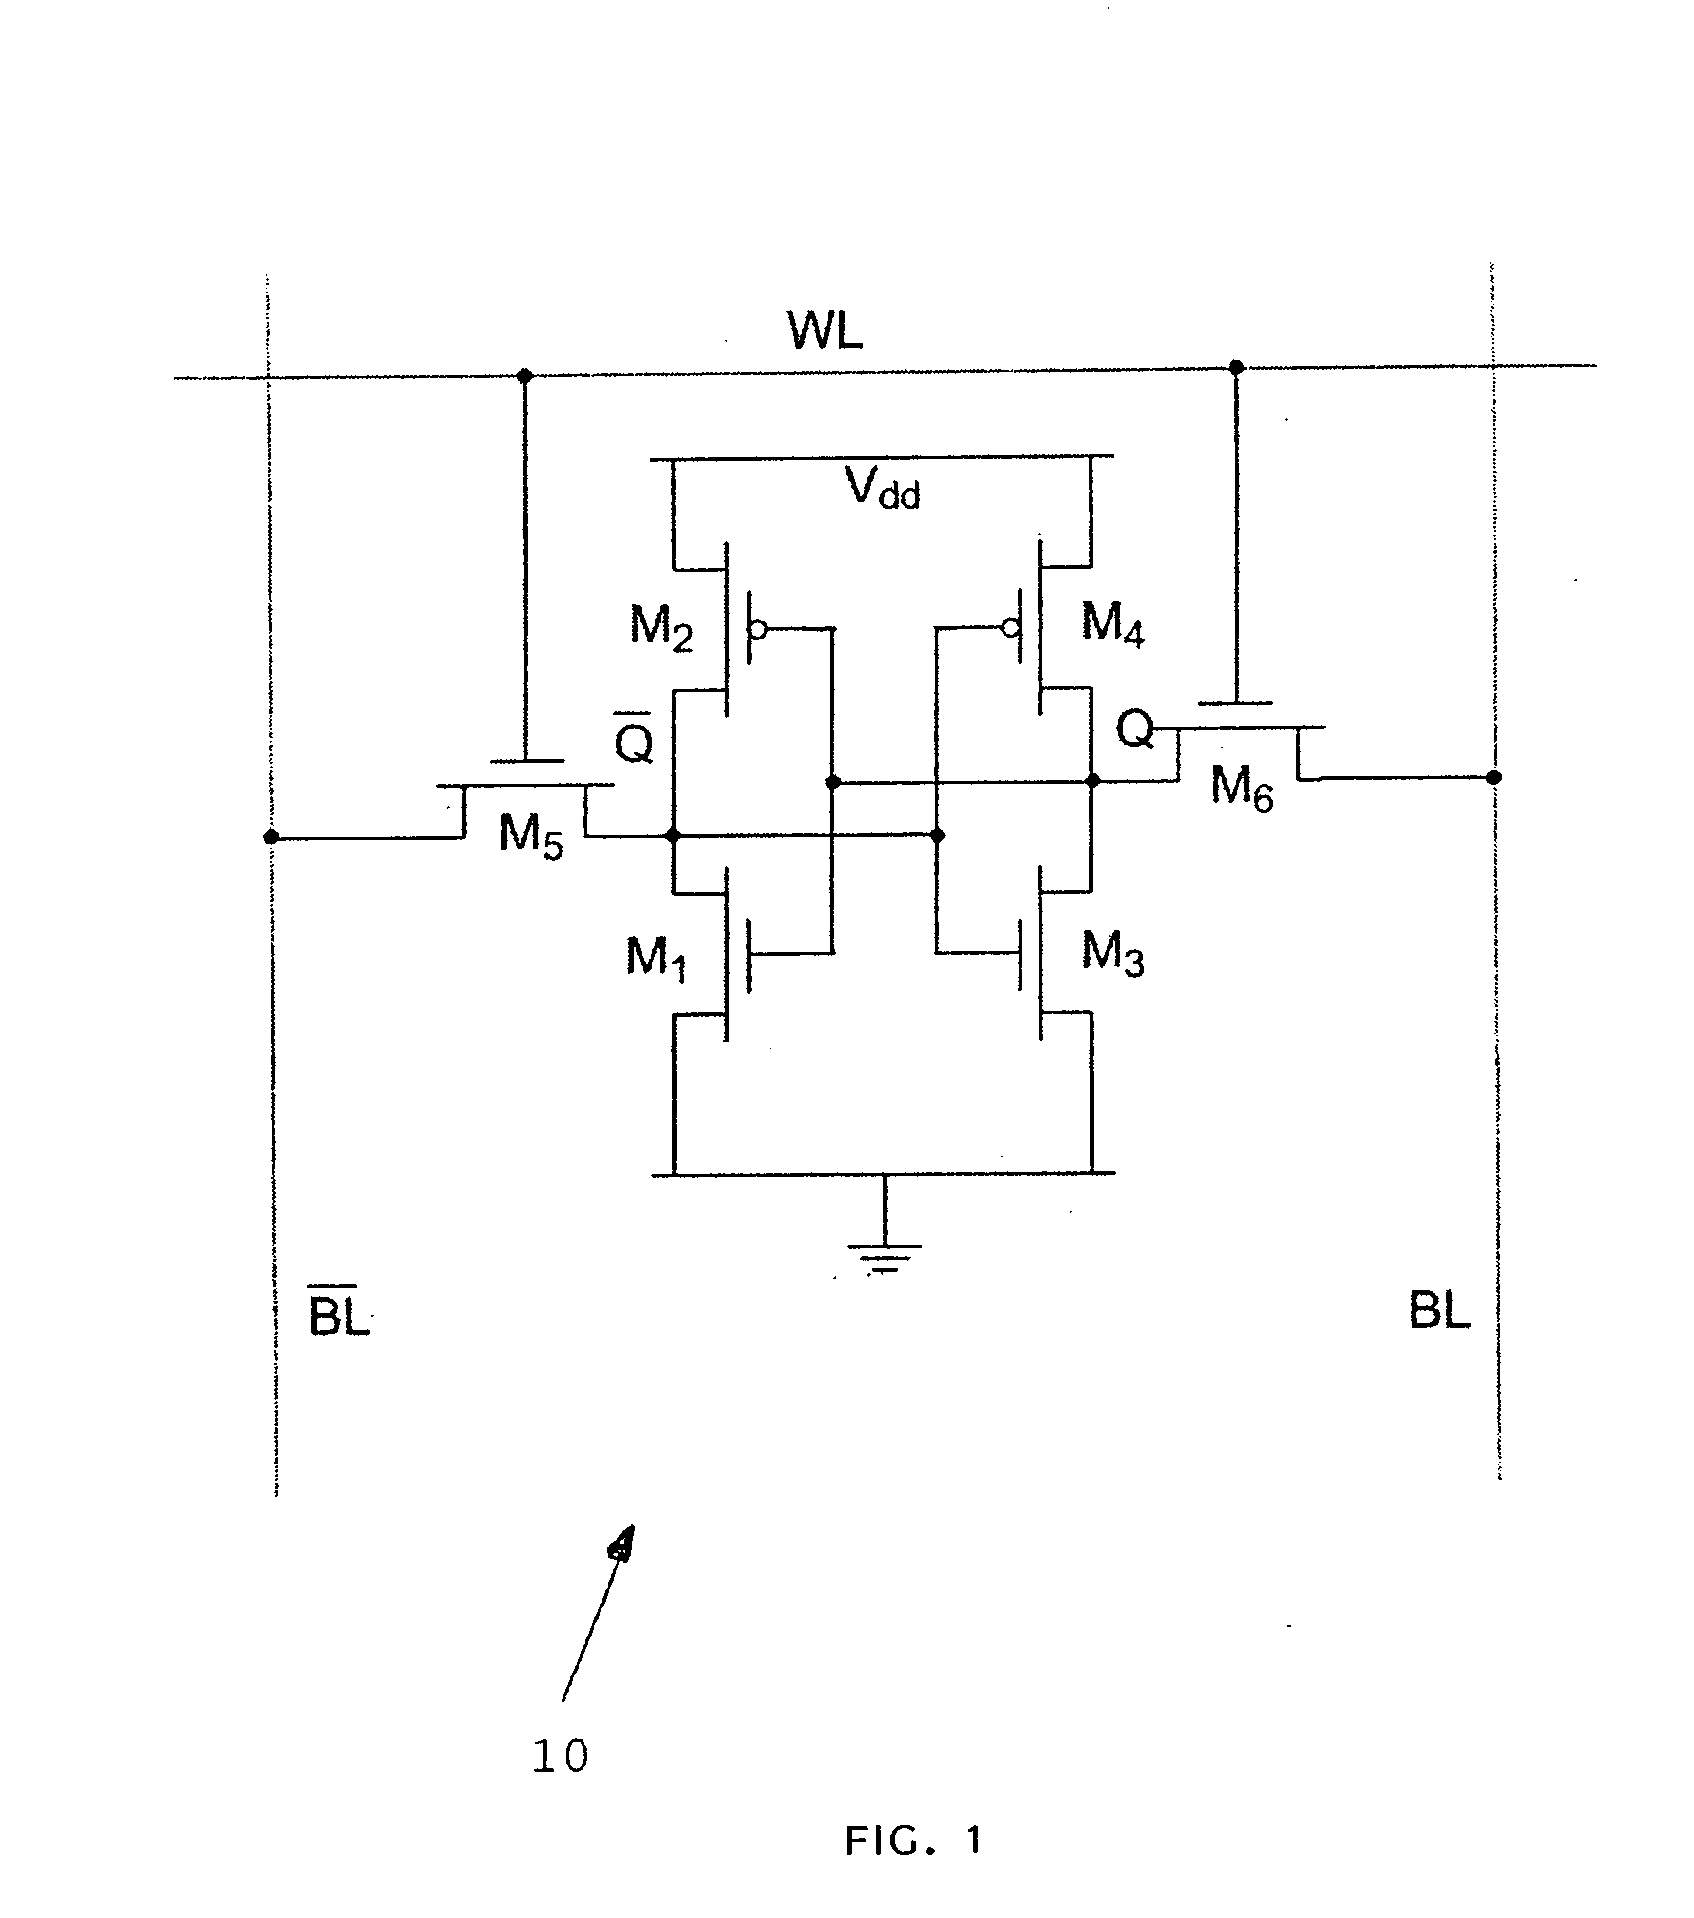 Method to improve performance of SRAM cells, SRAM cell, SRAM array, and write circuit